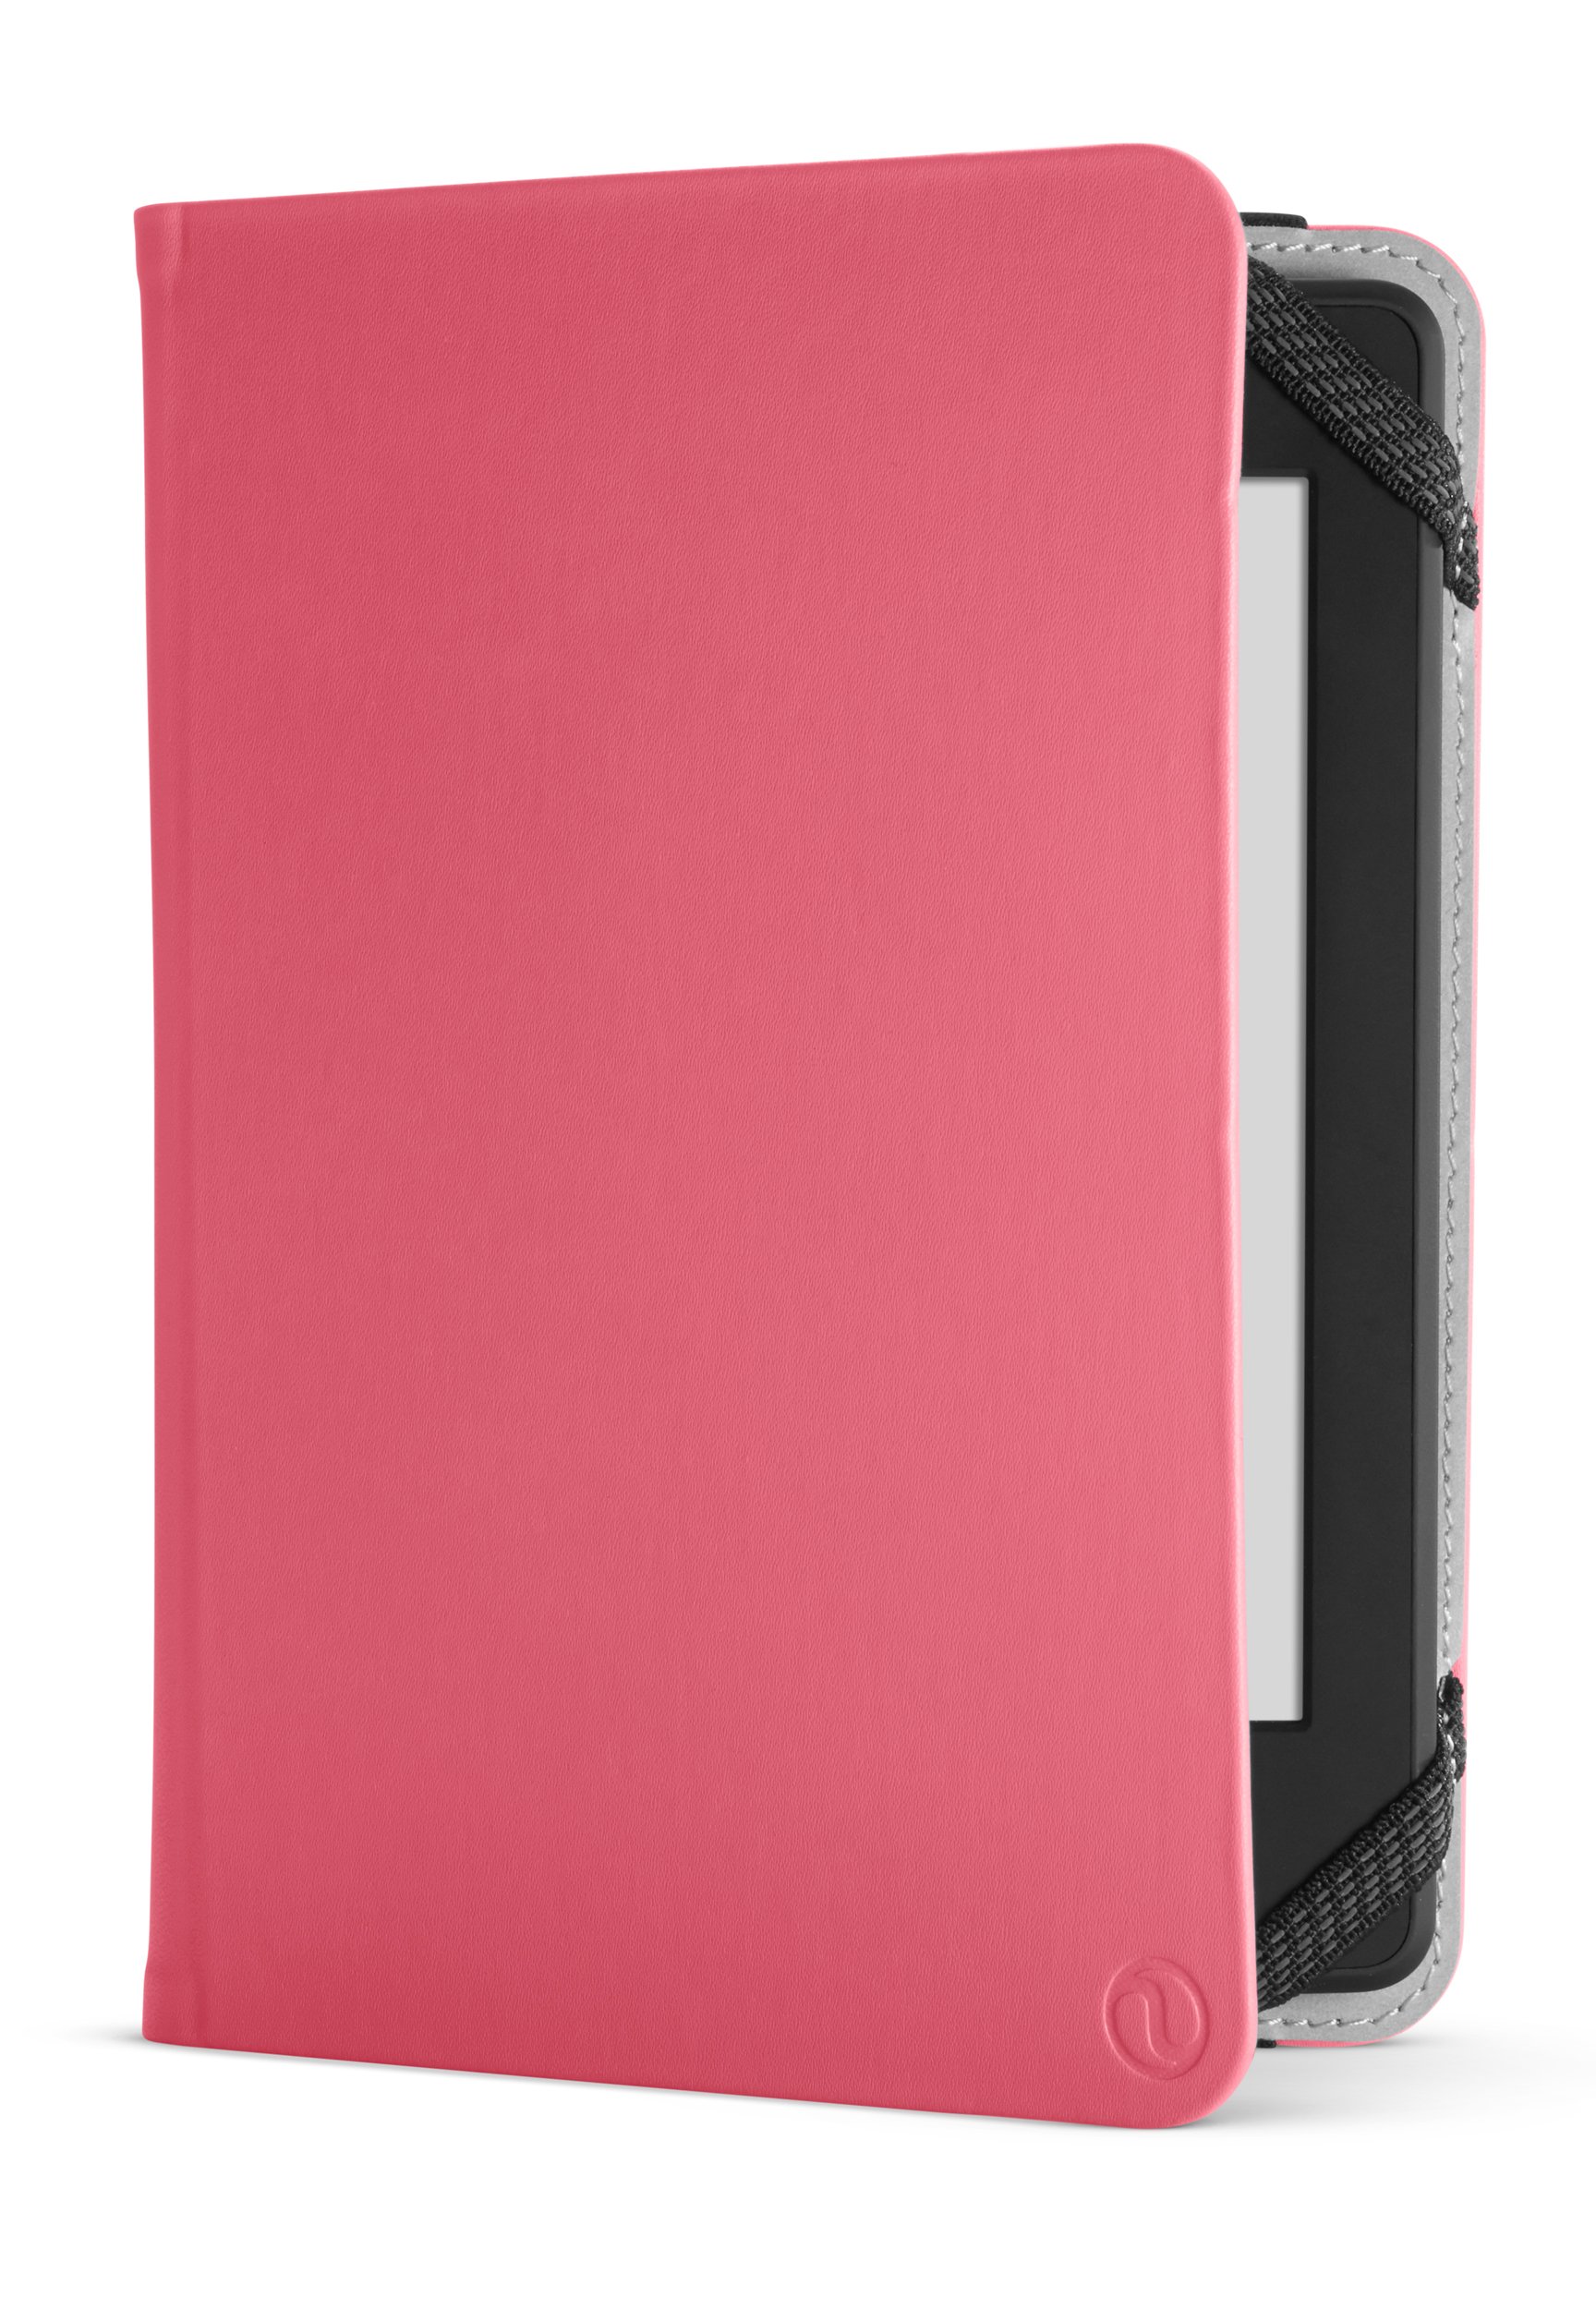 Book Cover NuPro Amazon Kindle Paperwhite Case - Lightweight Durable Slim Folio Cover (fits Kindle and Kindle Paperwhite), Pink